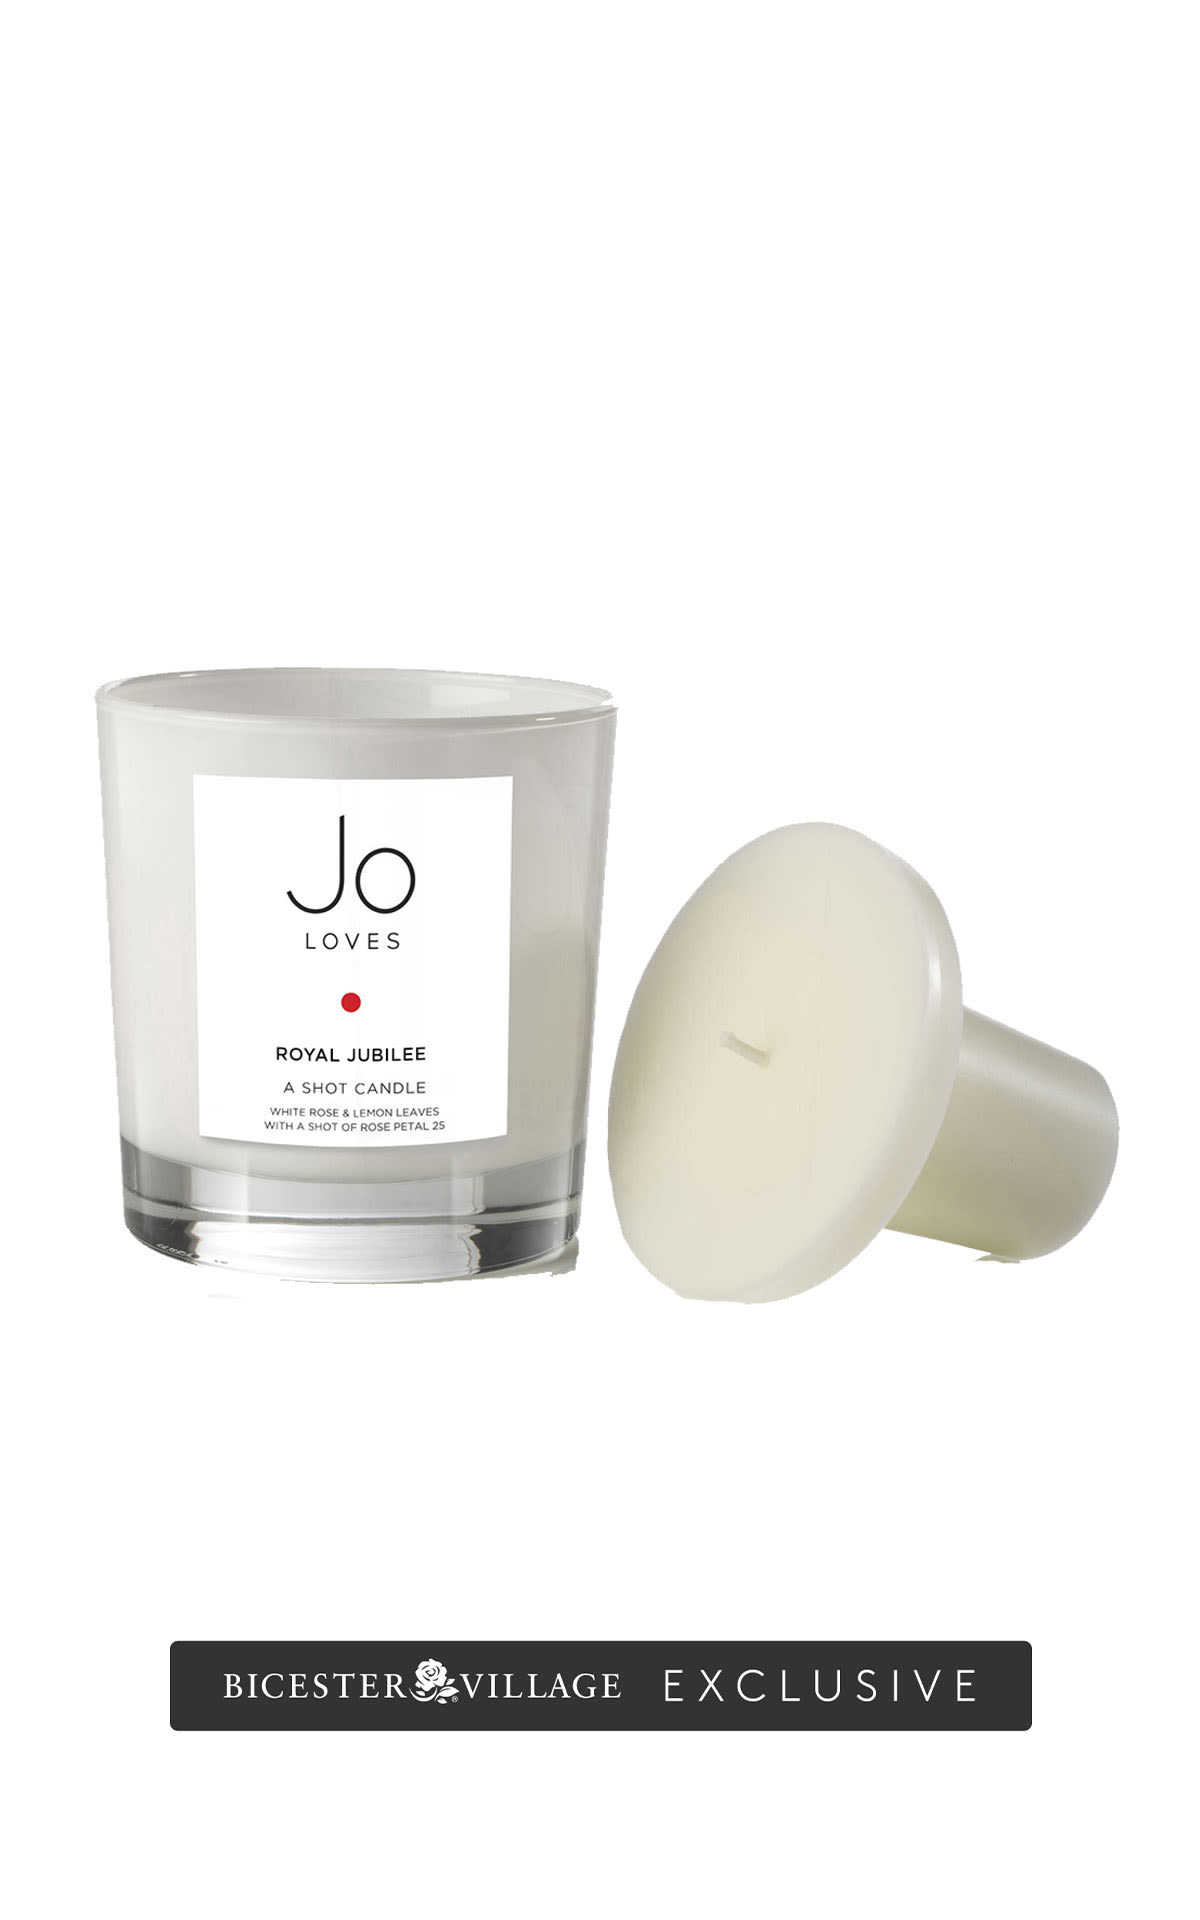 Jo Loves Royal jubilee shot candle from Bicester Village